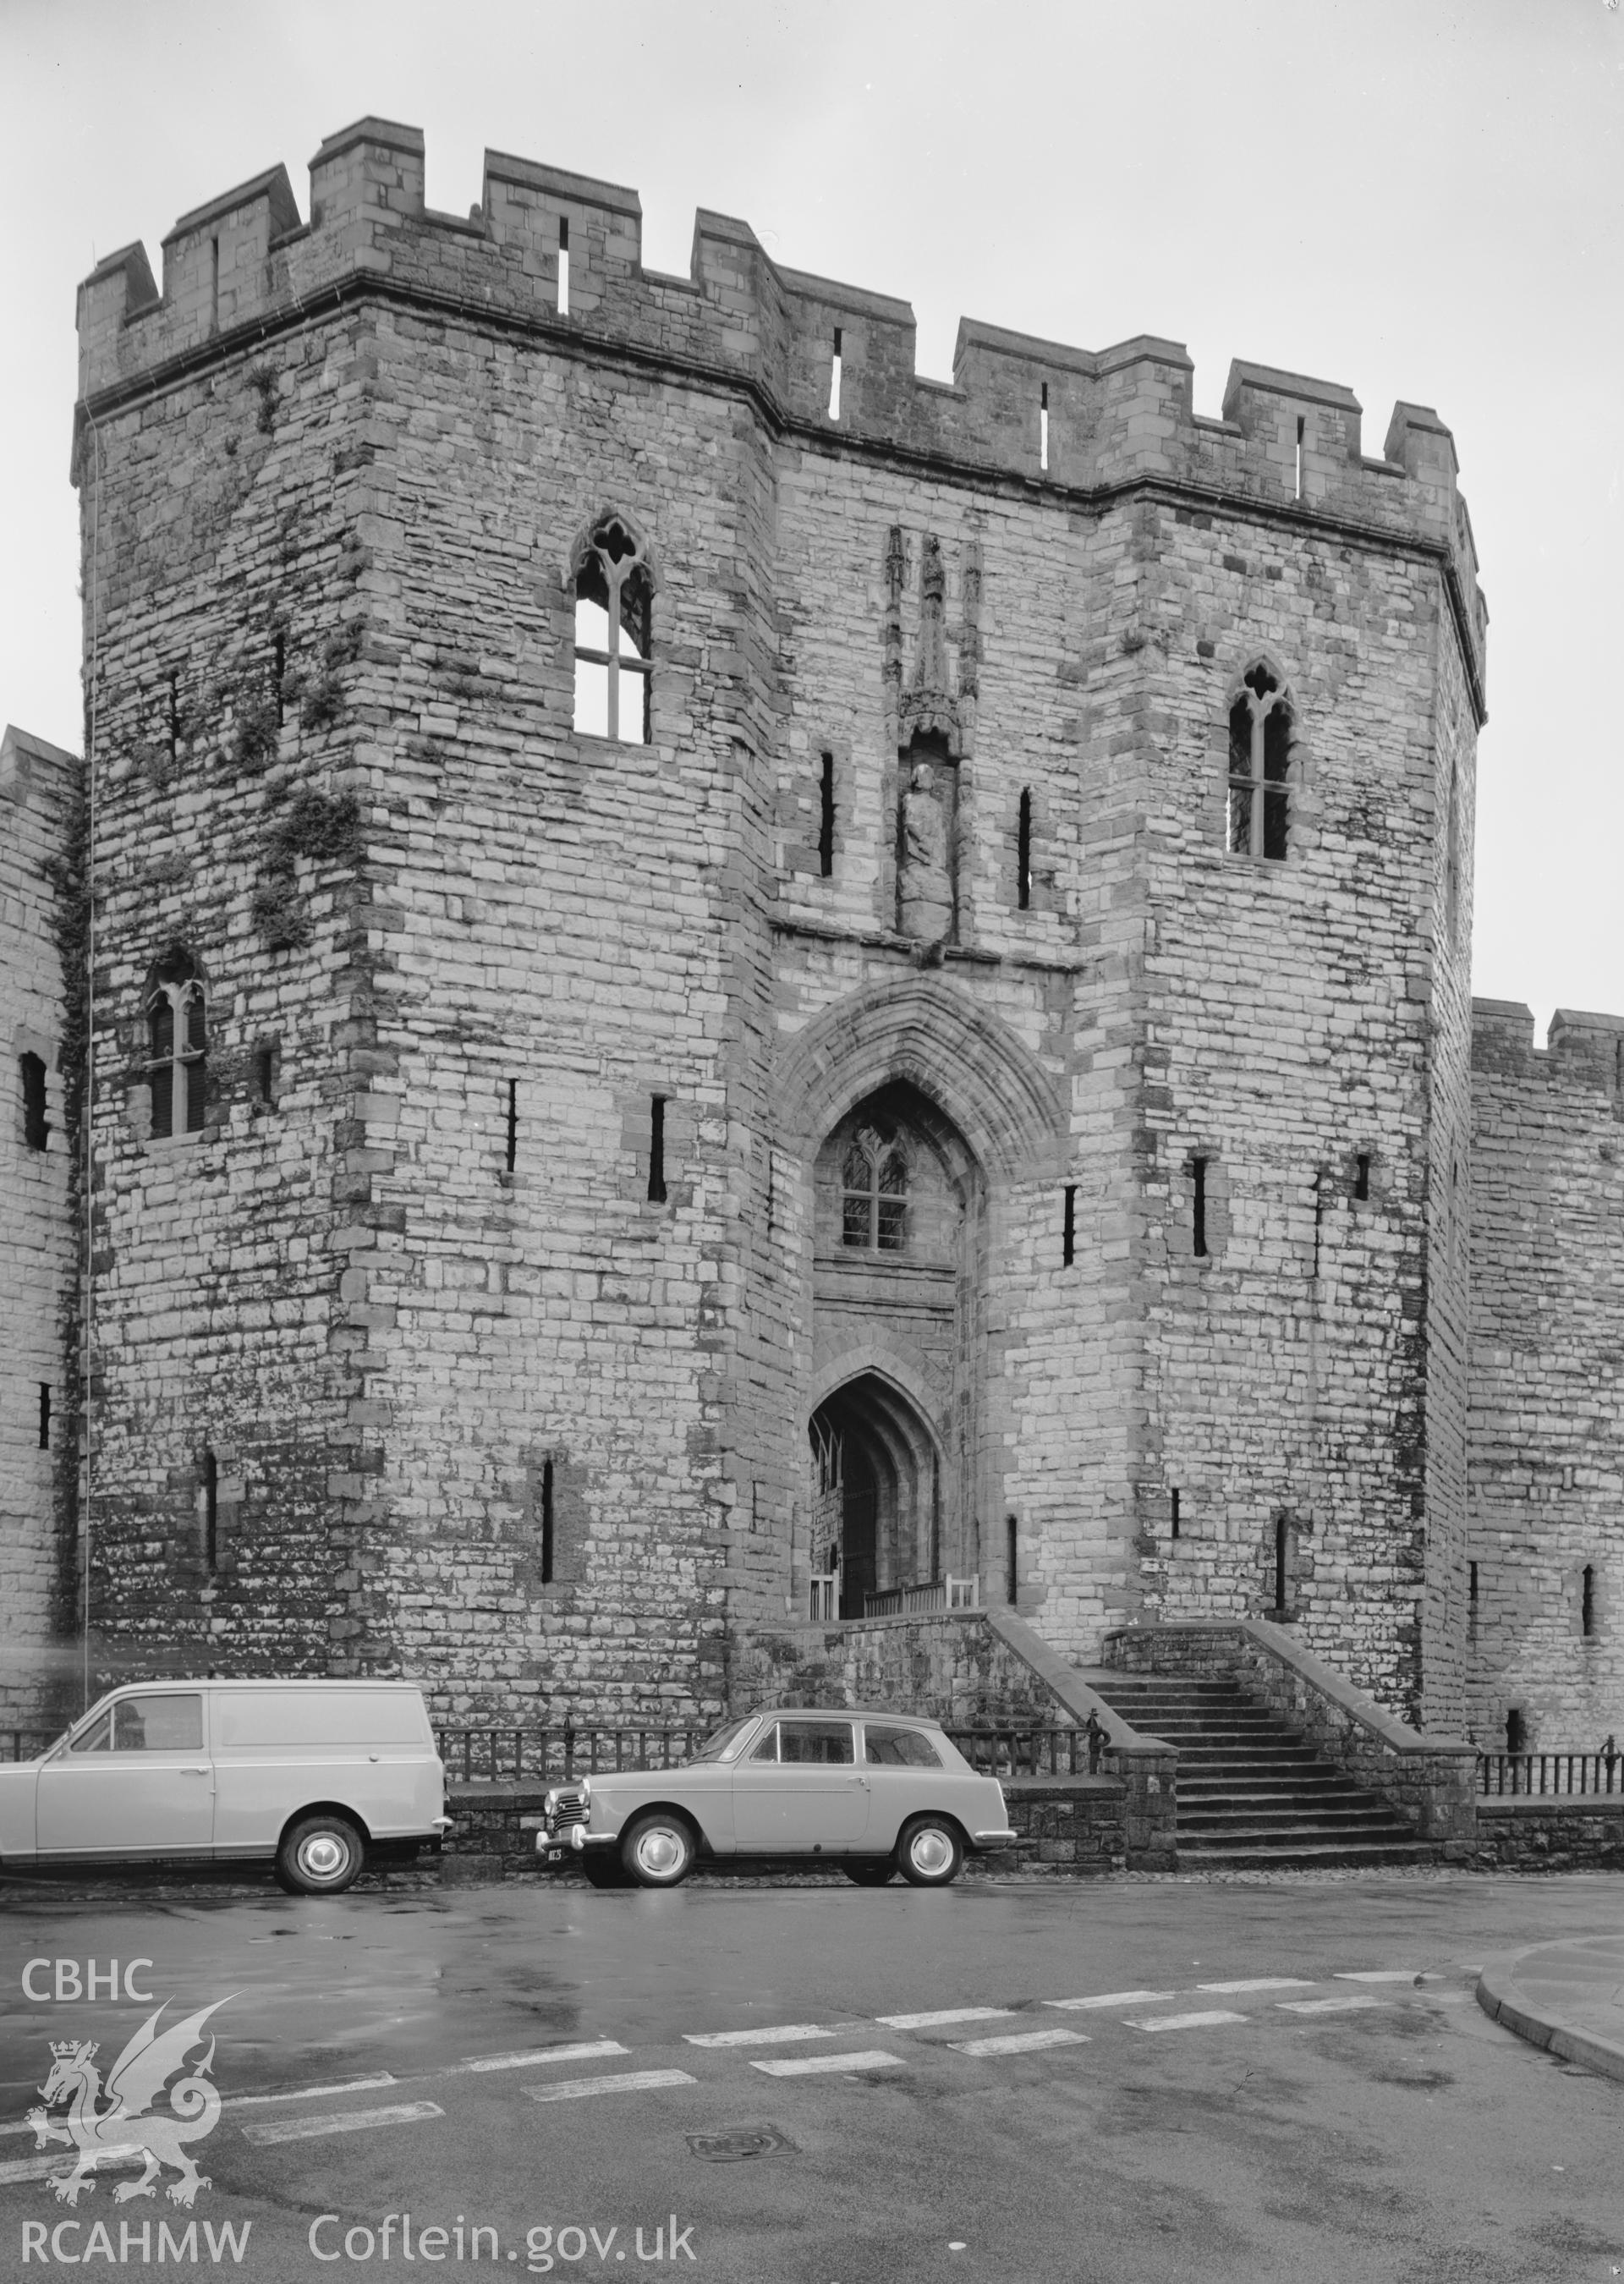 D.O.E photograph of Caernarfon Castle - Kings Gate, parked cars prominent in foreground.